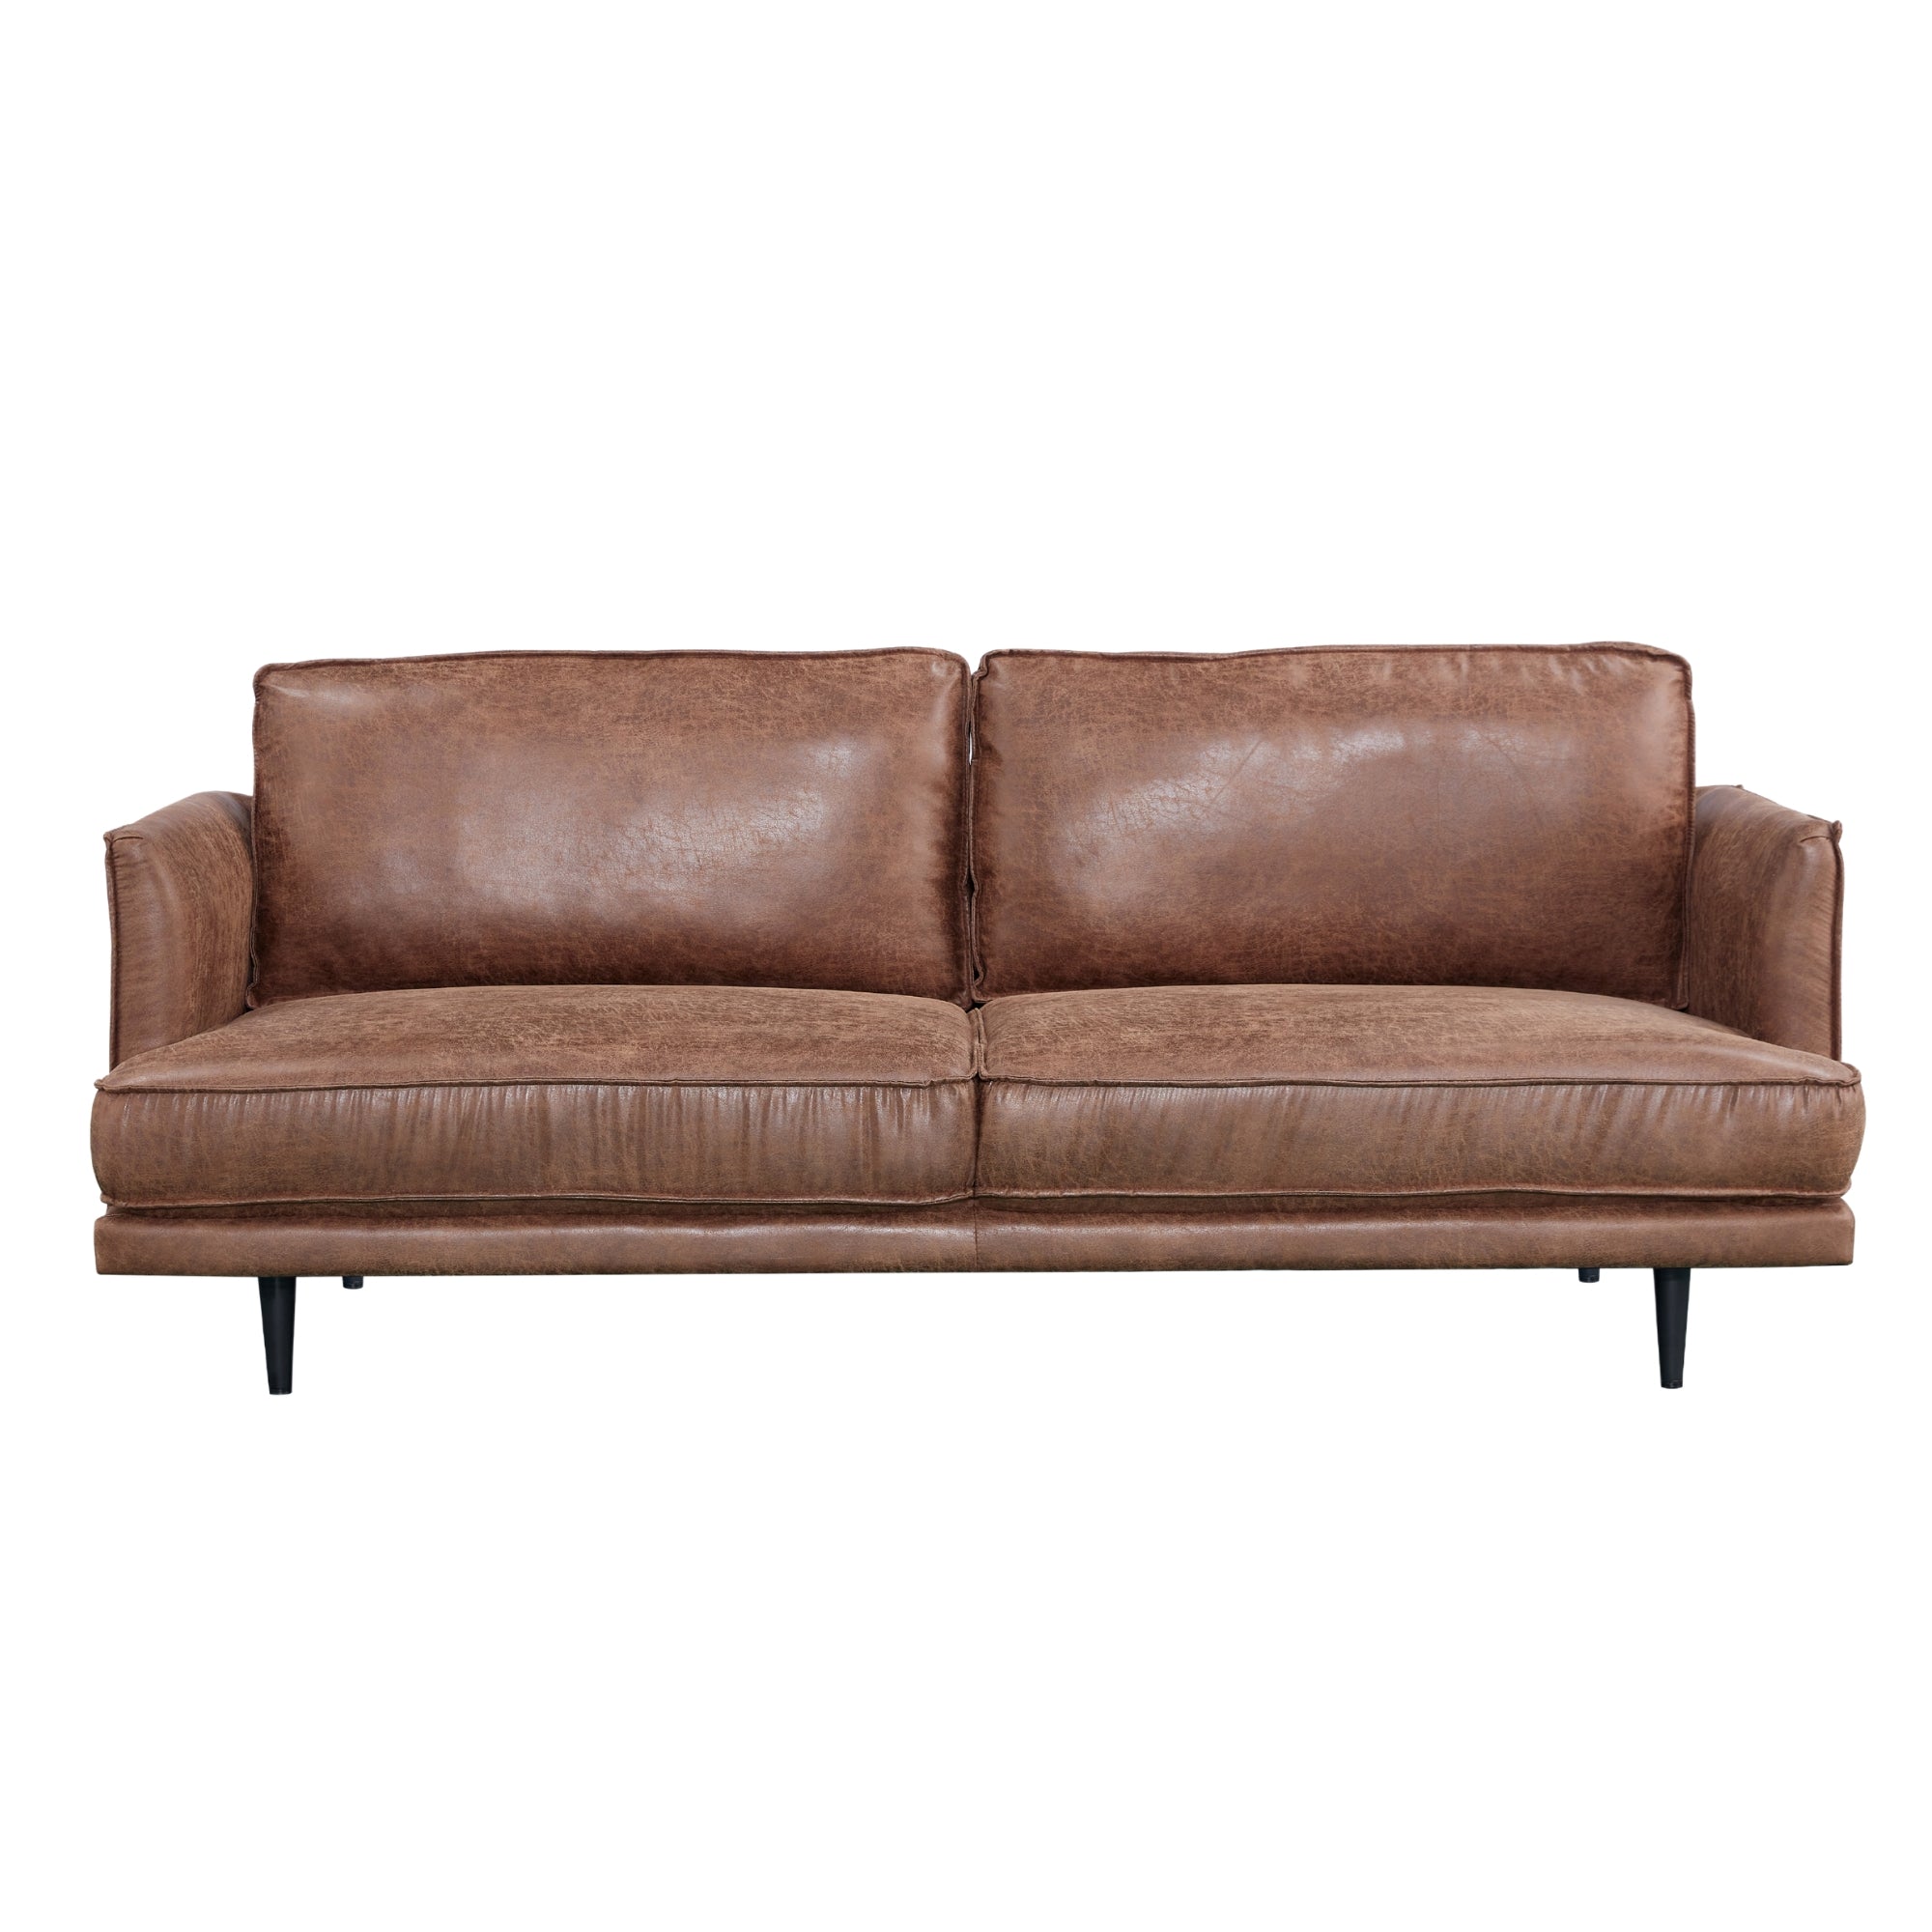 Durable Galvanized Steel Frame 3+2 Seater Sofa Set Upholstered in Stain Resistant Highland Fabric - Rosie